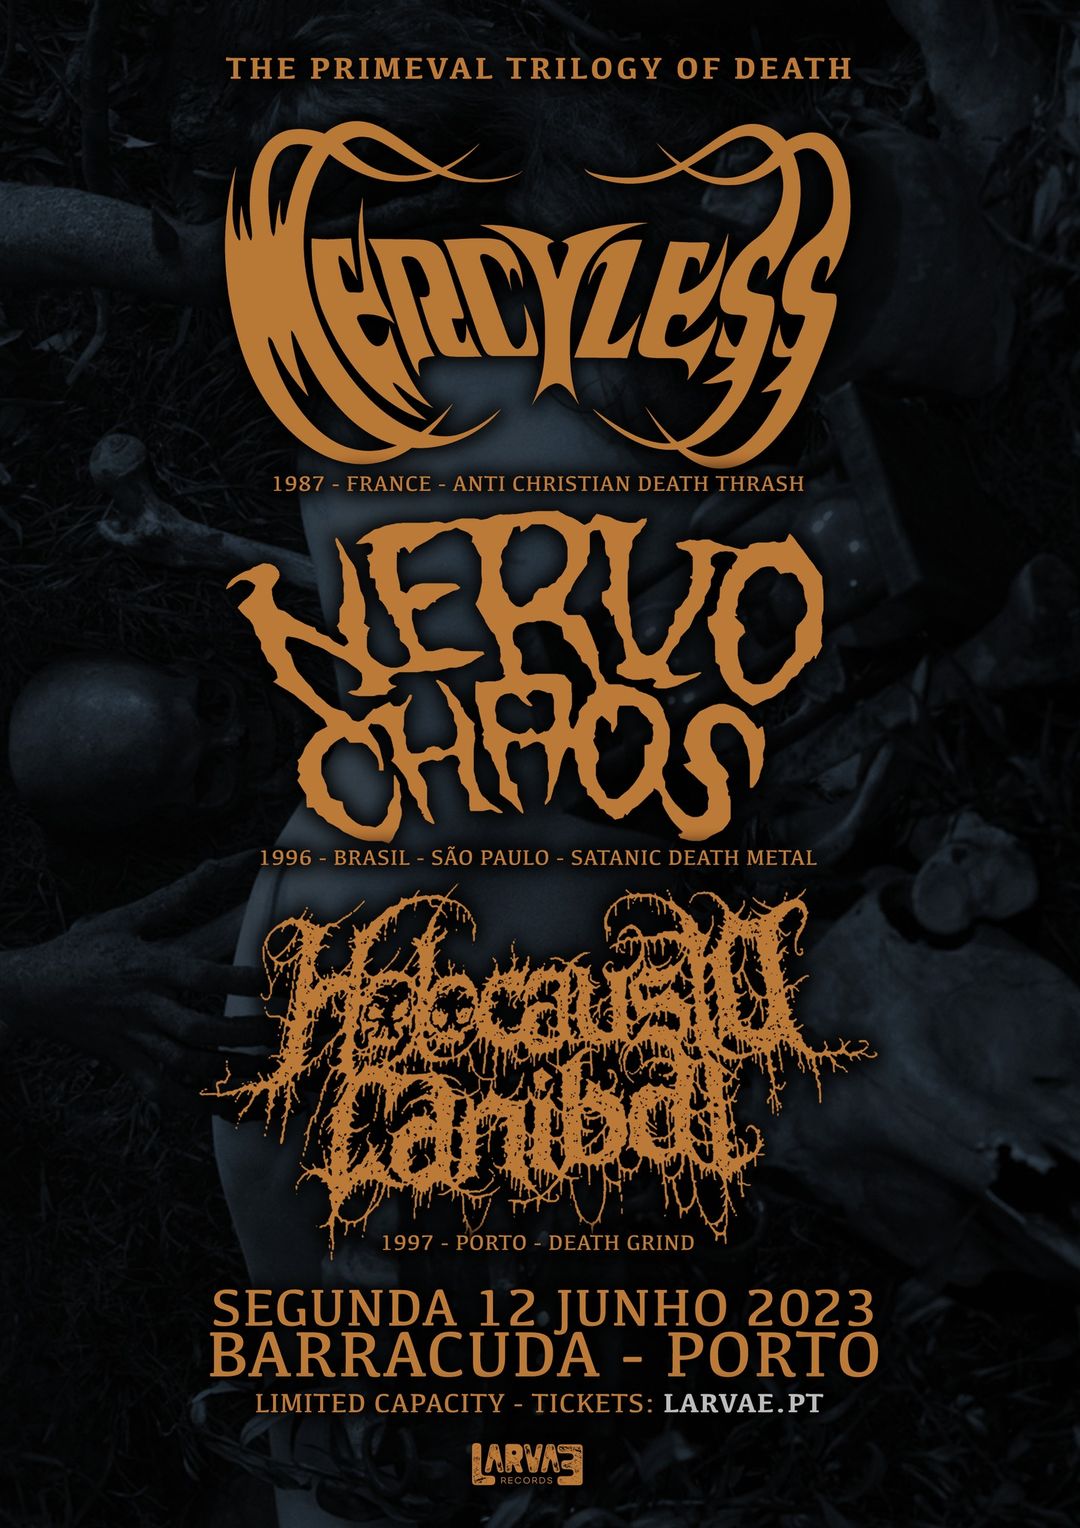 The Primeval Trilogy of Death - MERCYLESS + NERVOCHAOS + HOLOCAUSTO CANIBAL